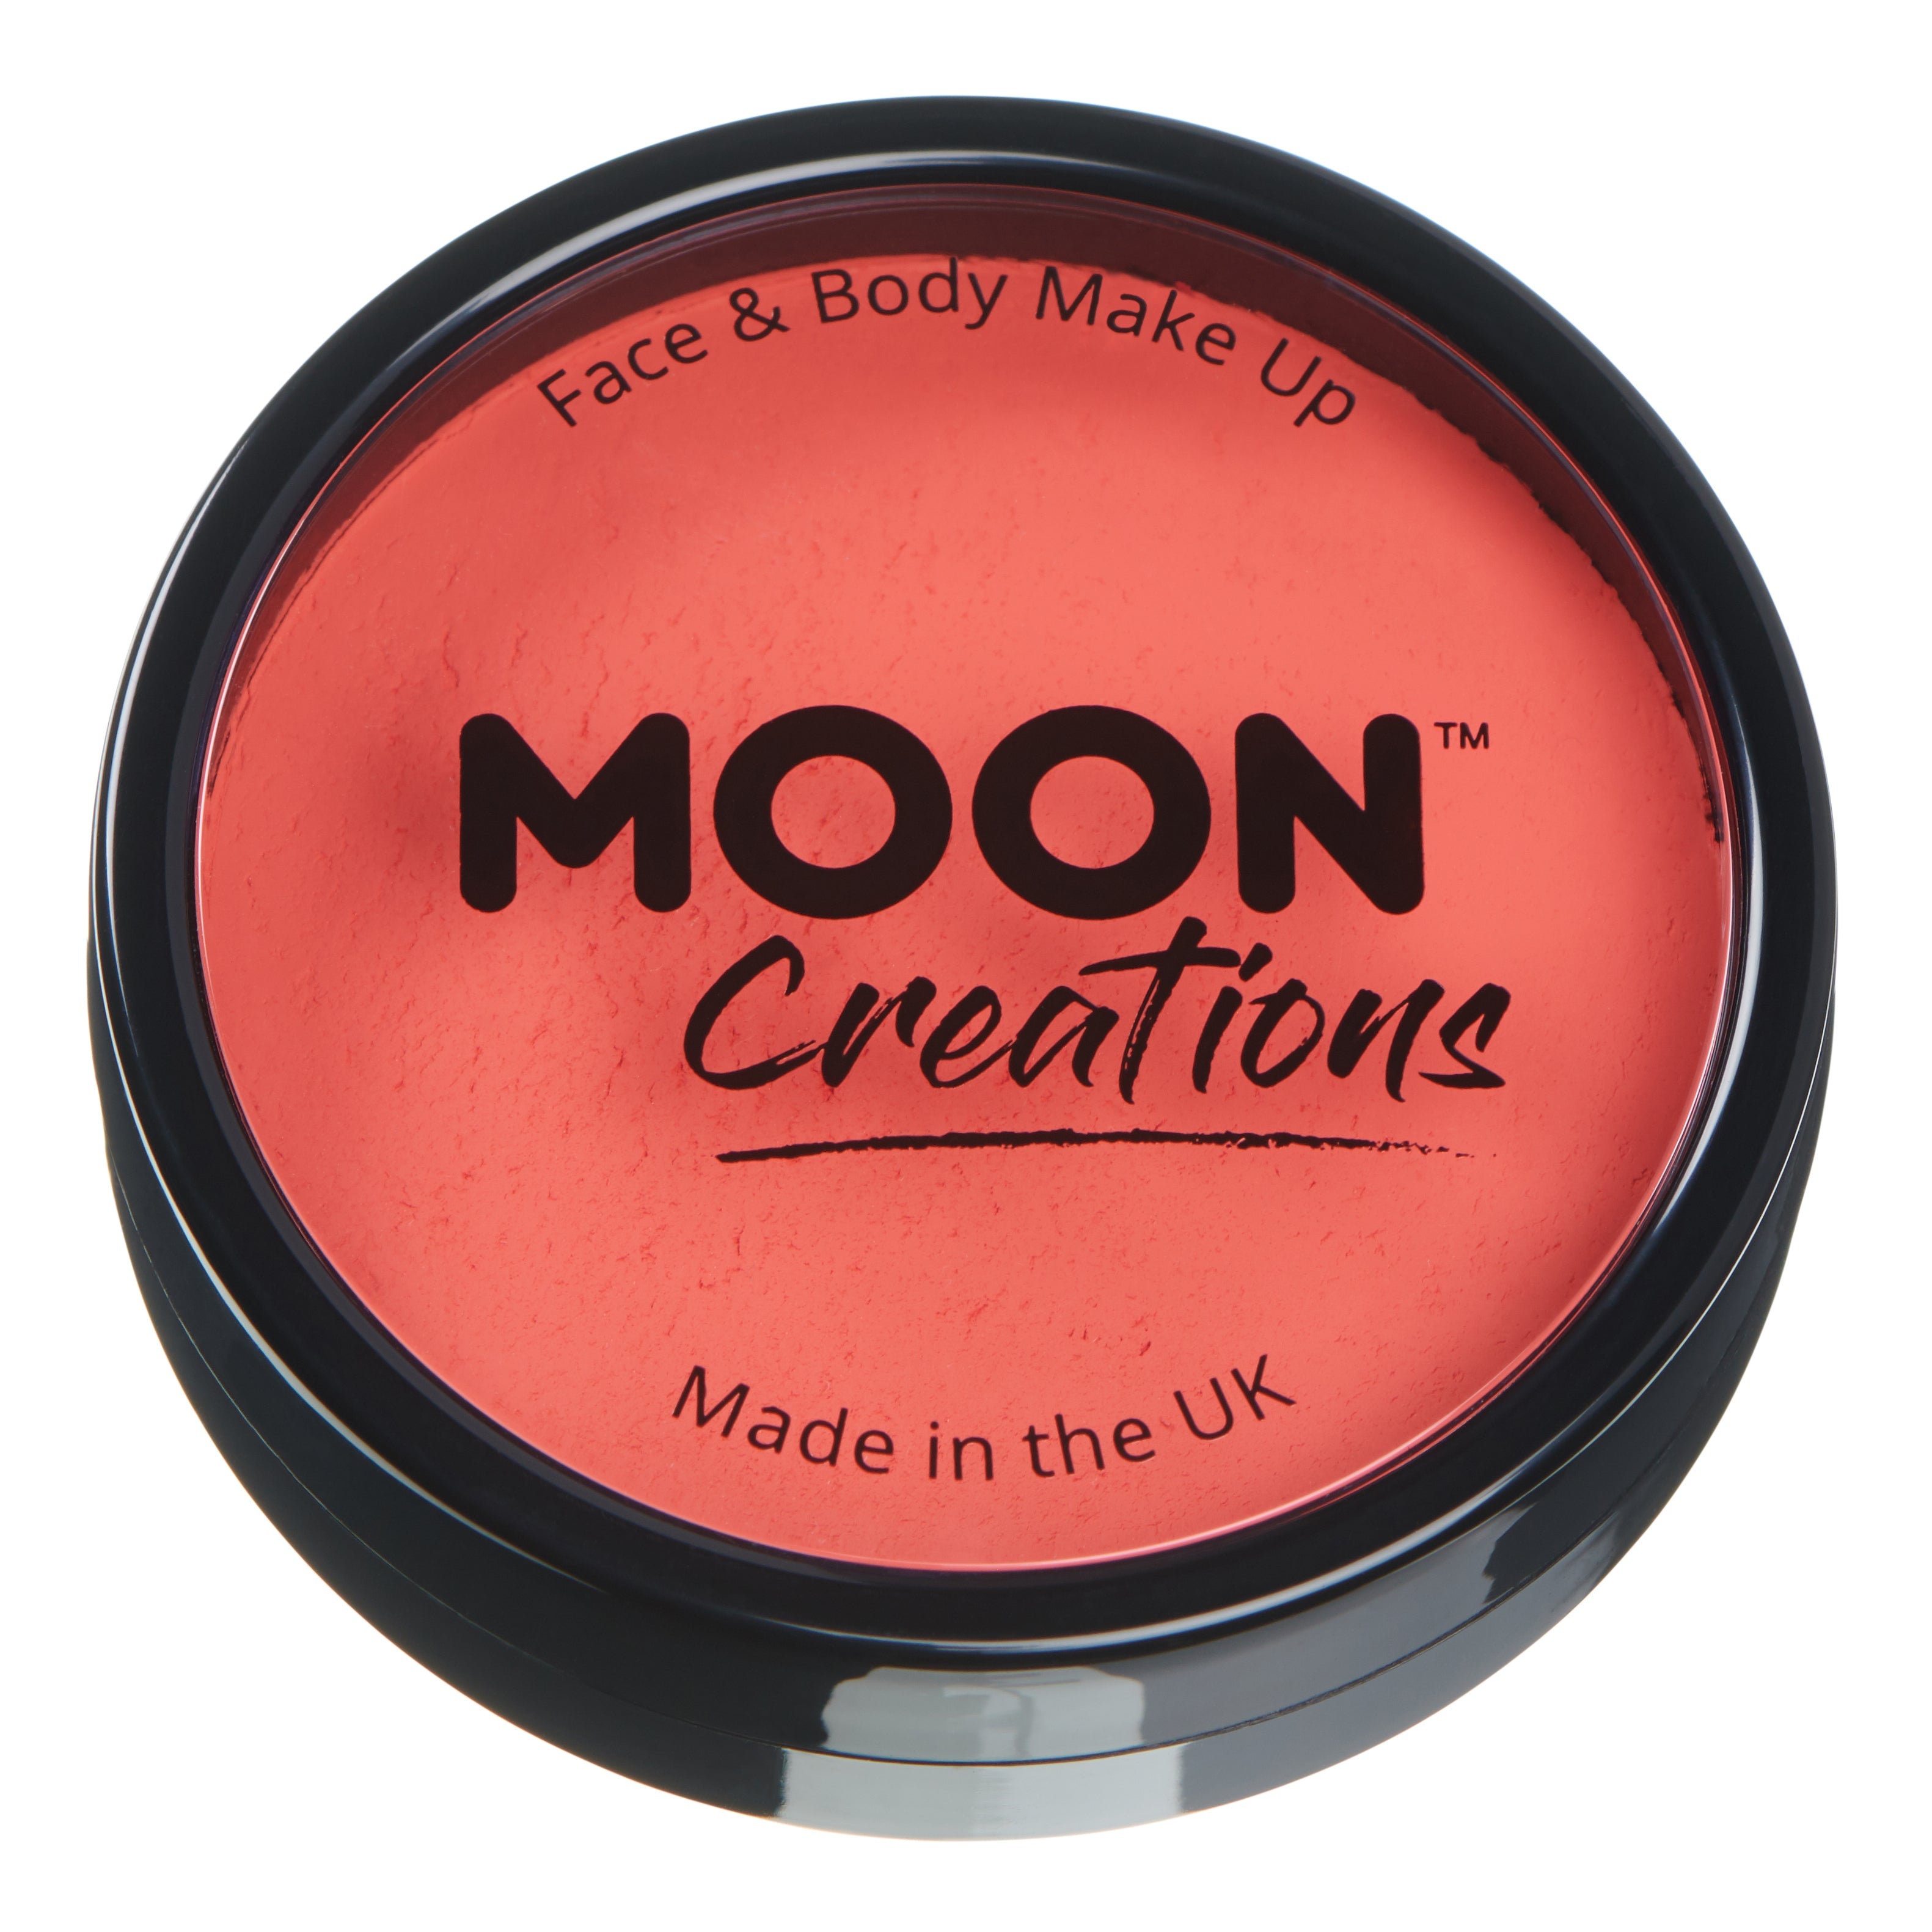 Coral - Pro Professional Face Paint, 36g. Cosmetically certified, FDA & Health Canada compliant, cruelty free and vegan.